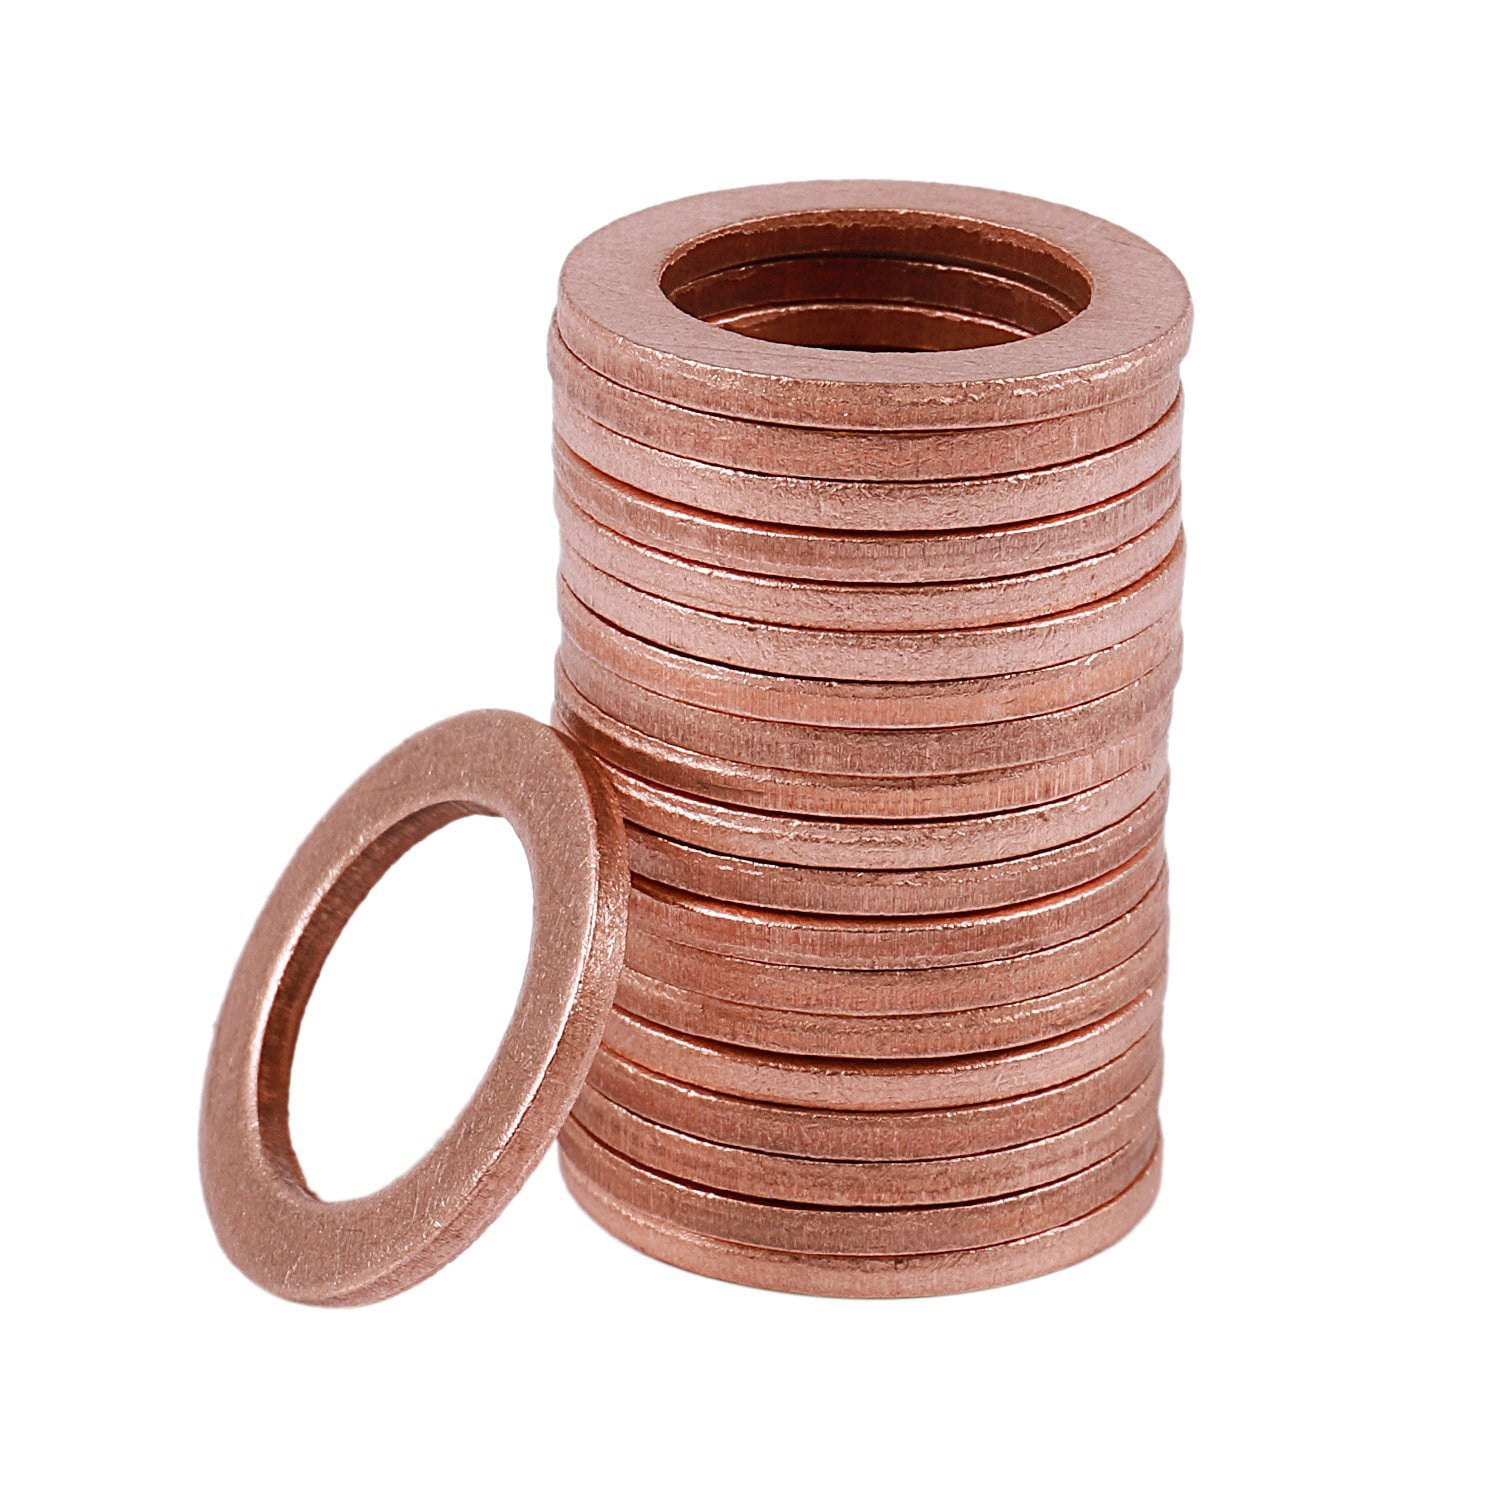 60 Pieces M14 x 18 x 1.5mm Copper Flat Washer Seal Washer 